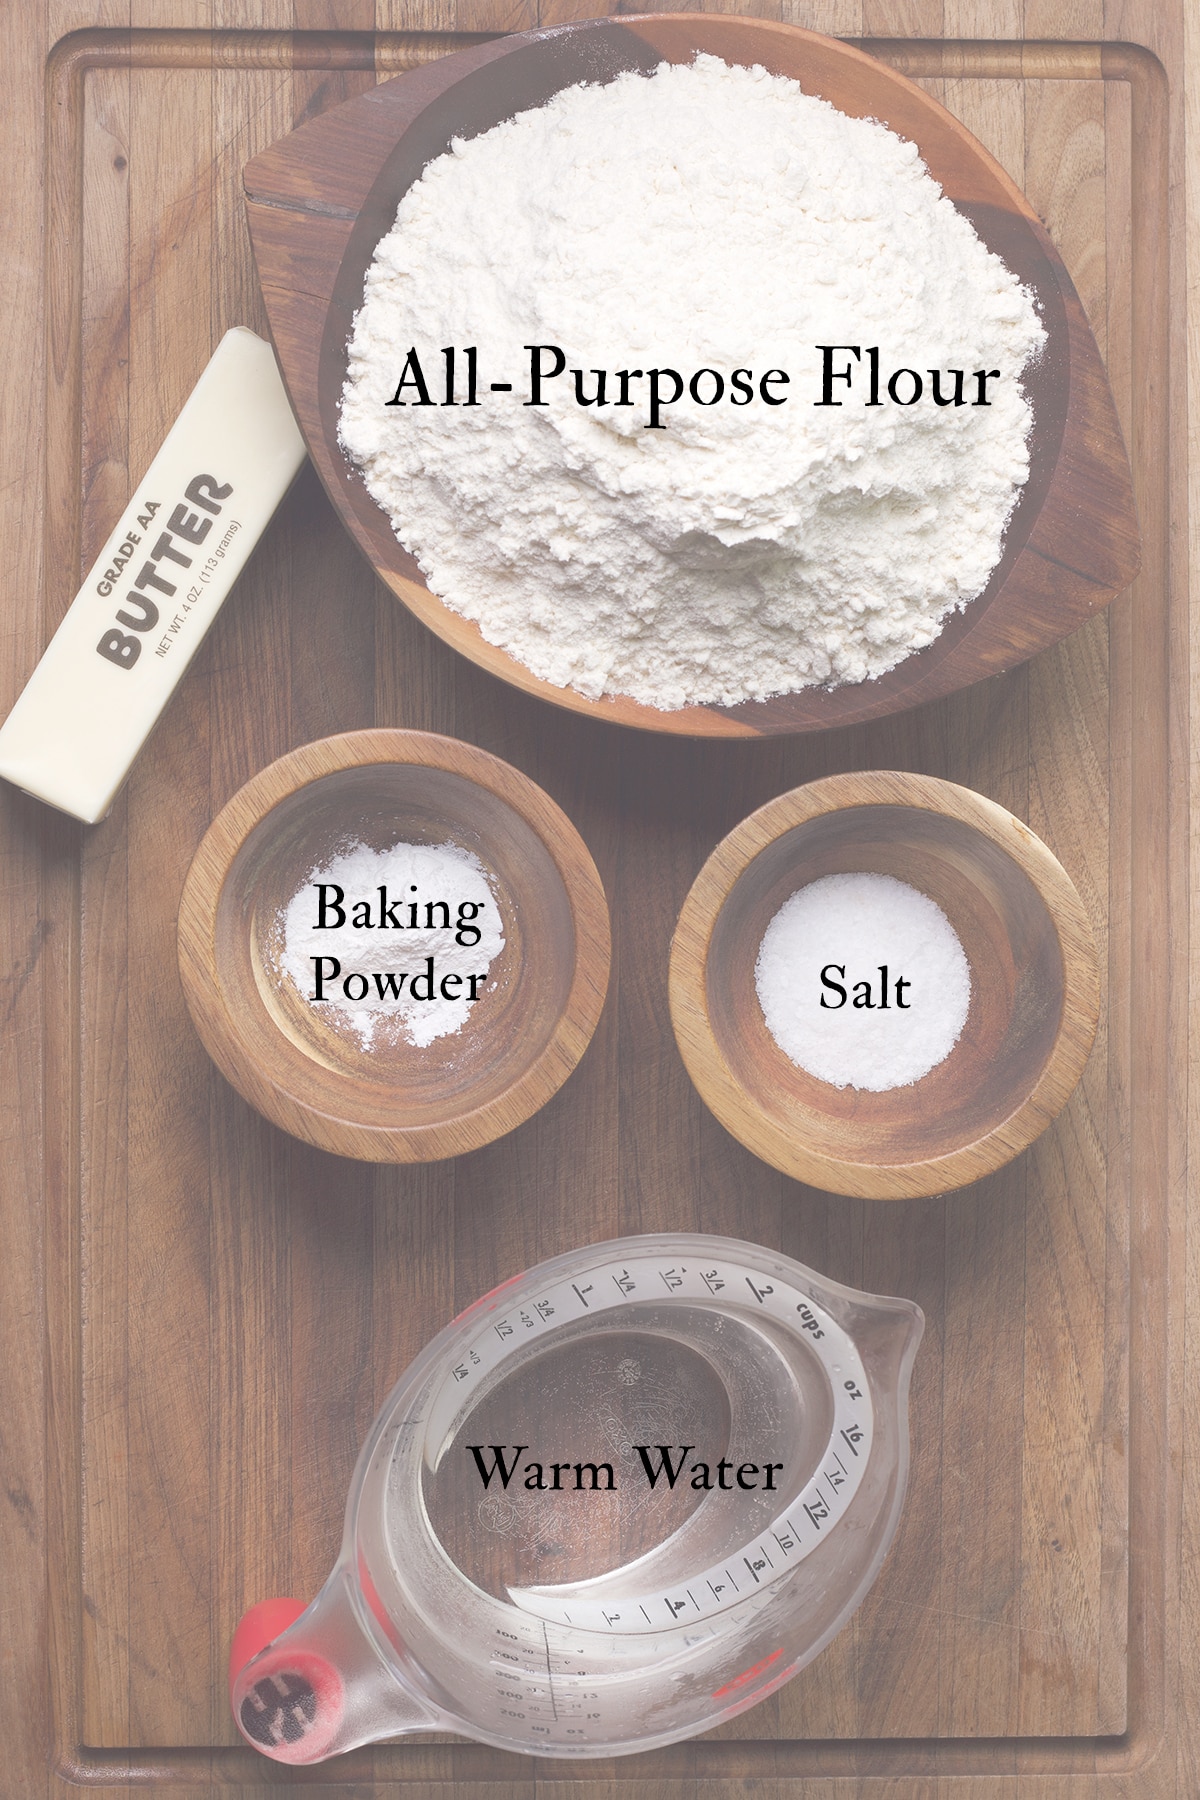 All the ingredients you need to make flour tortillas. 